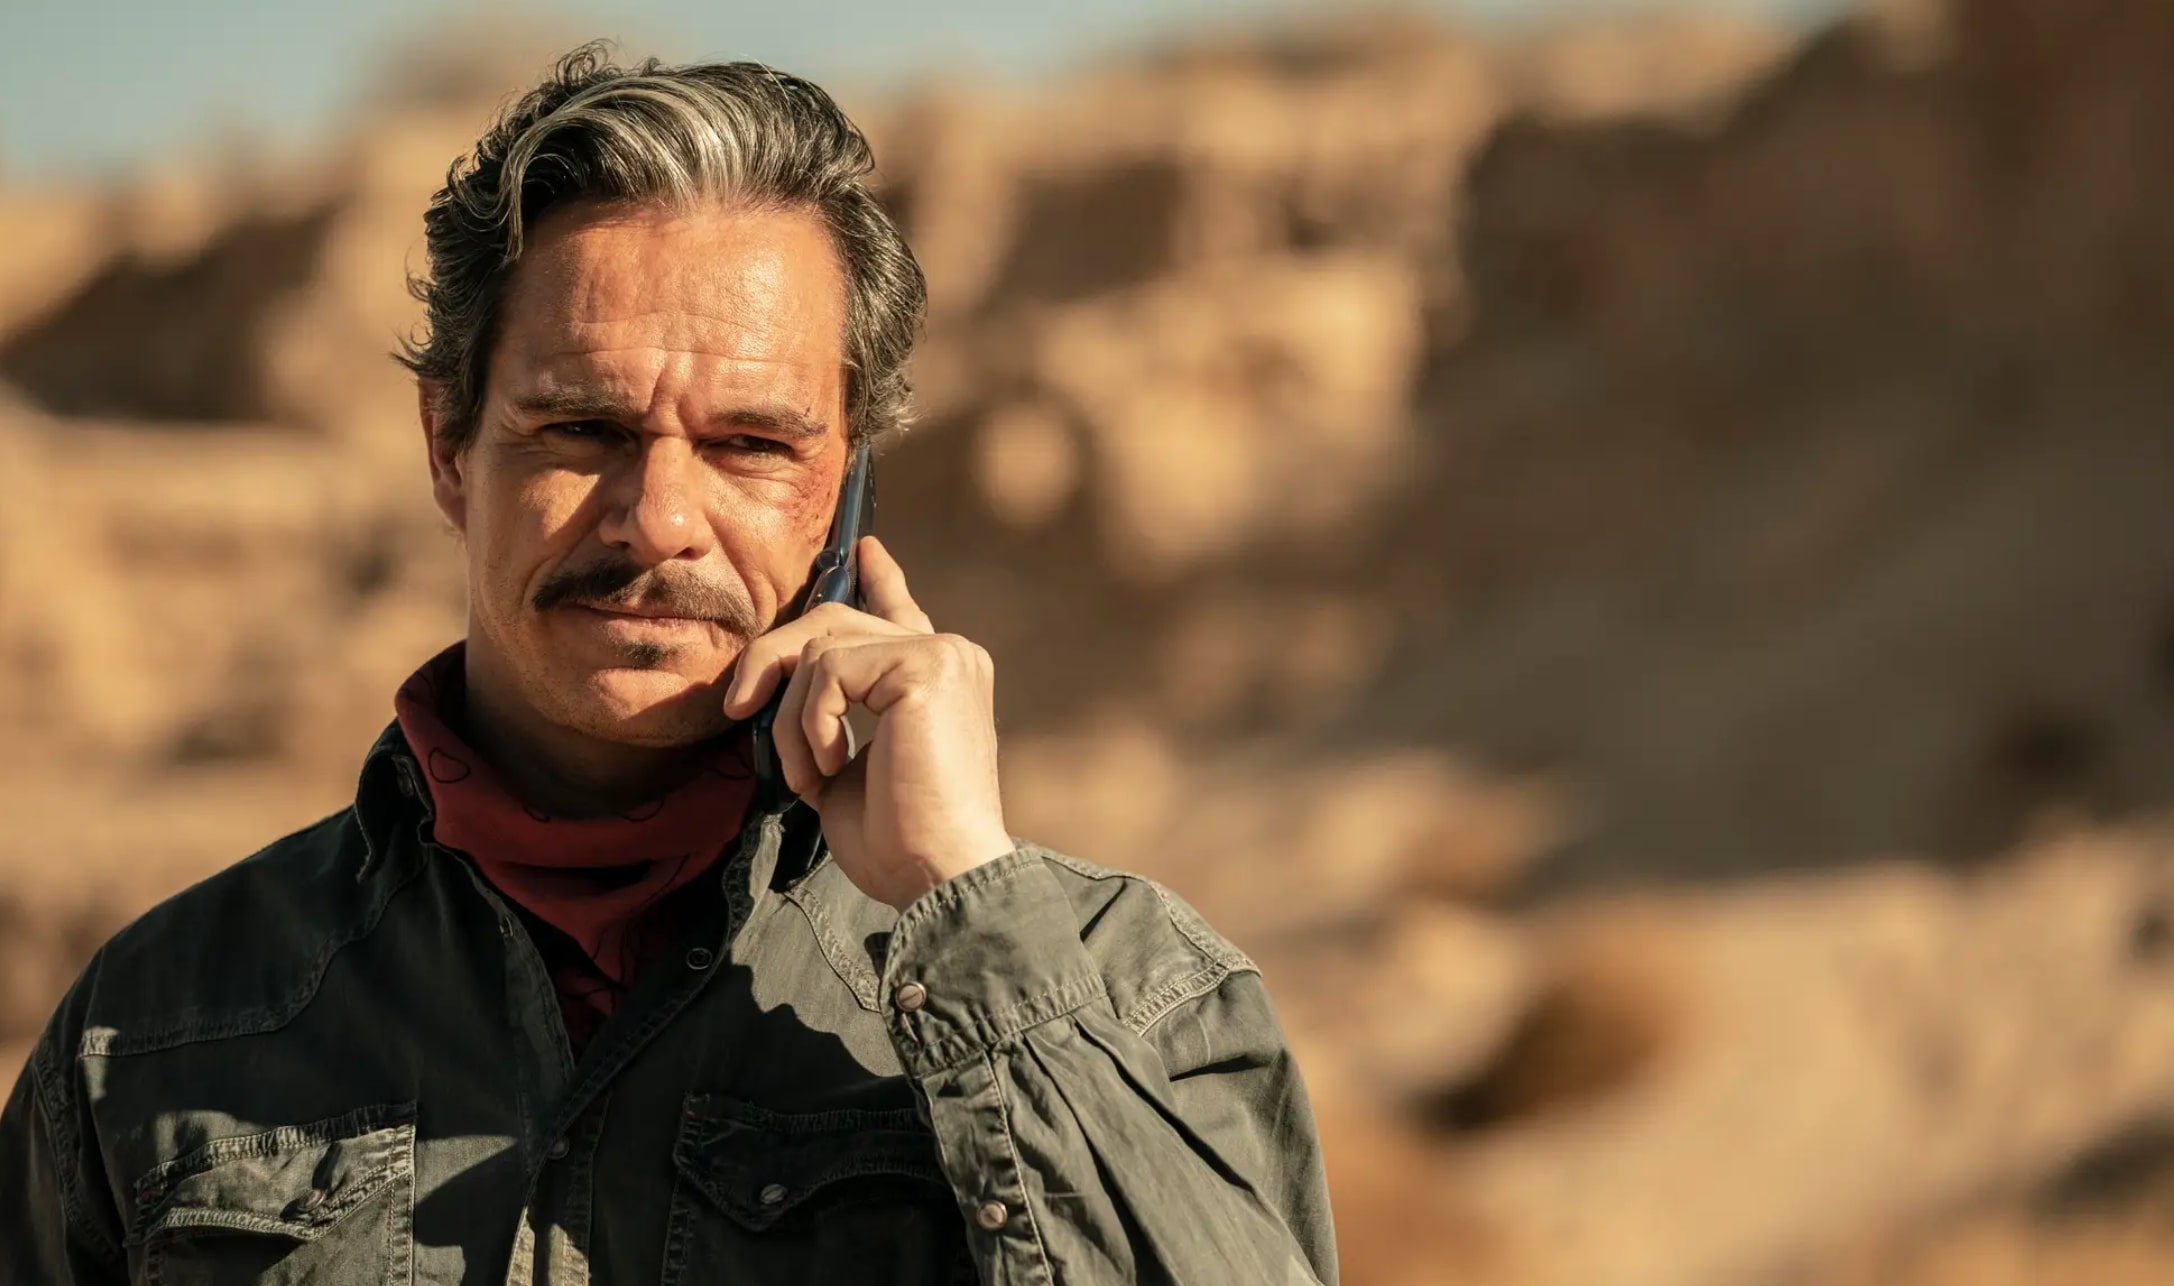 Better Call Saul fans have a theory about Lalo Salamanca’s whereabouts